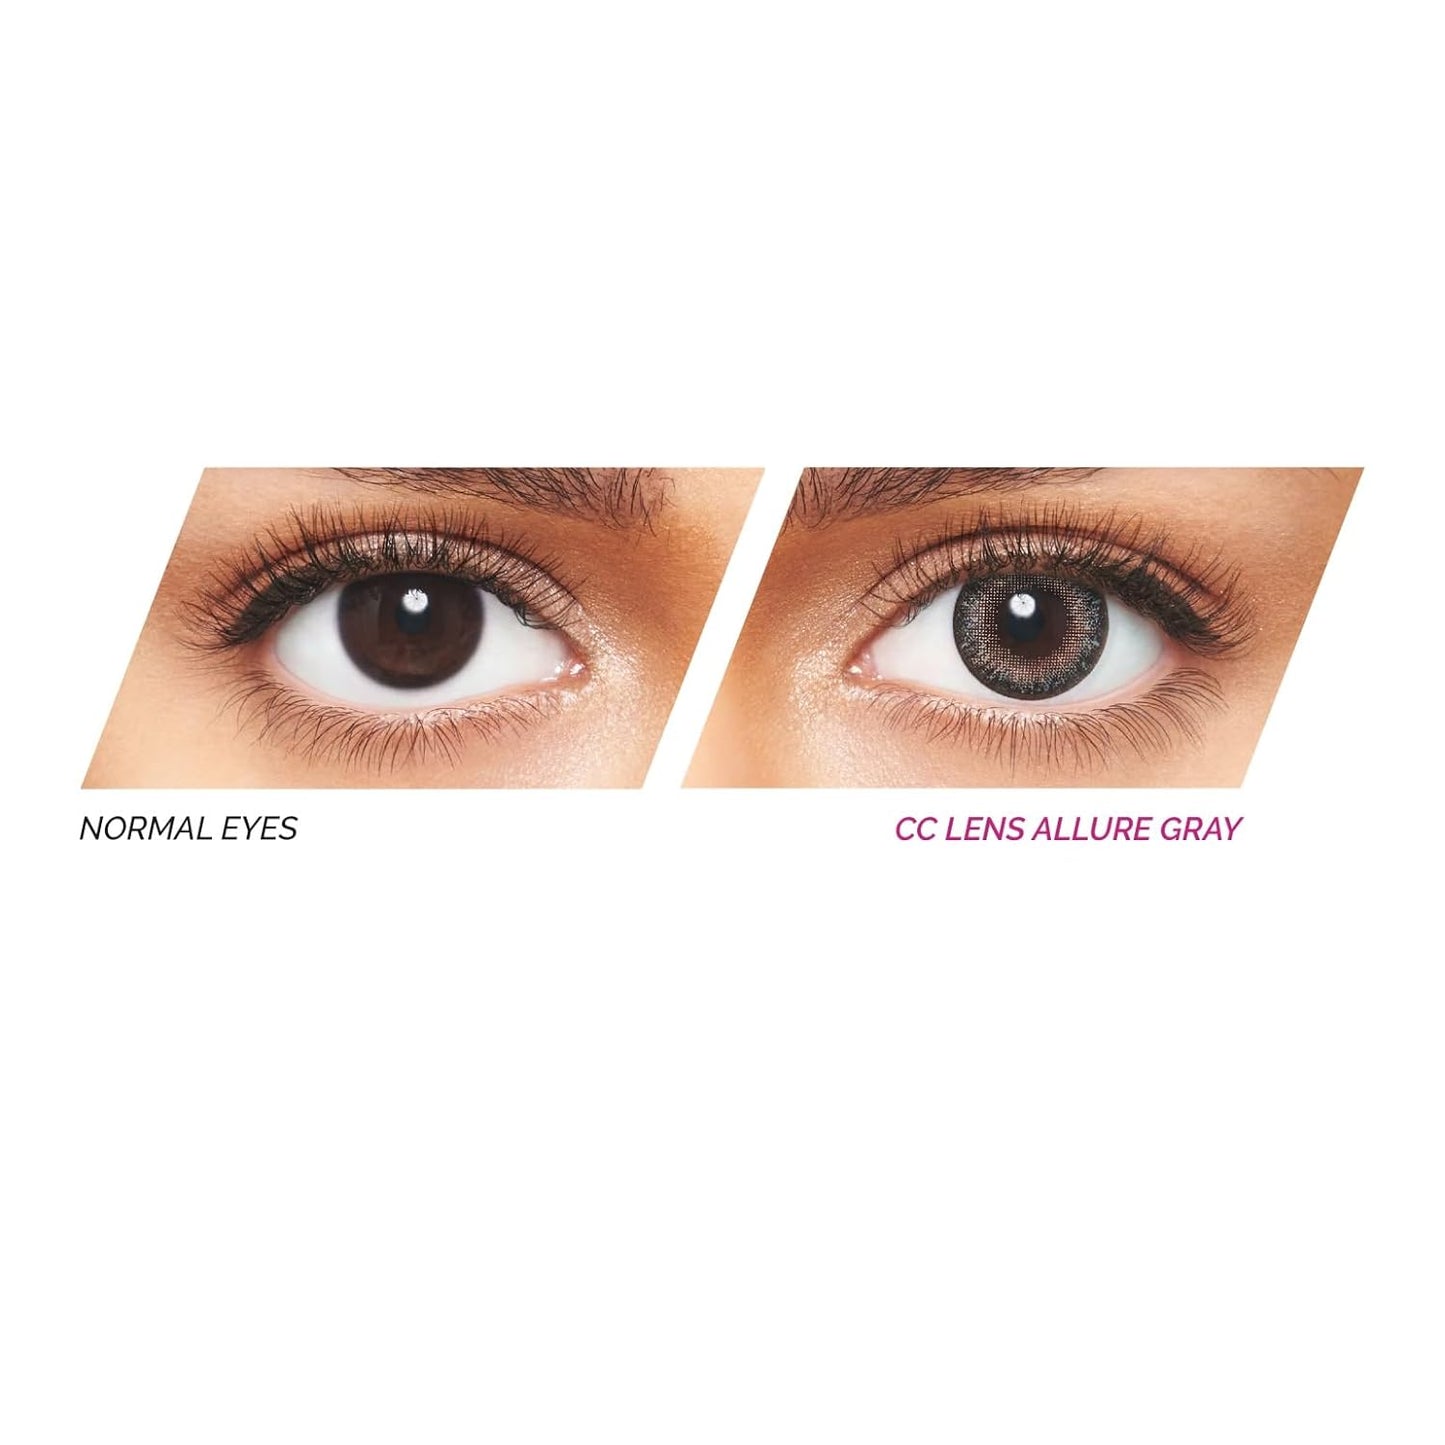 Freshlook Circle Color Allure Gray - Daily Disposable Color Contact Lenses One-Day CC Lenses From Alcon (10 Lens/Box)